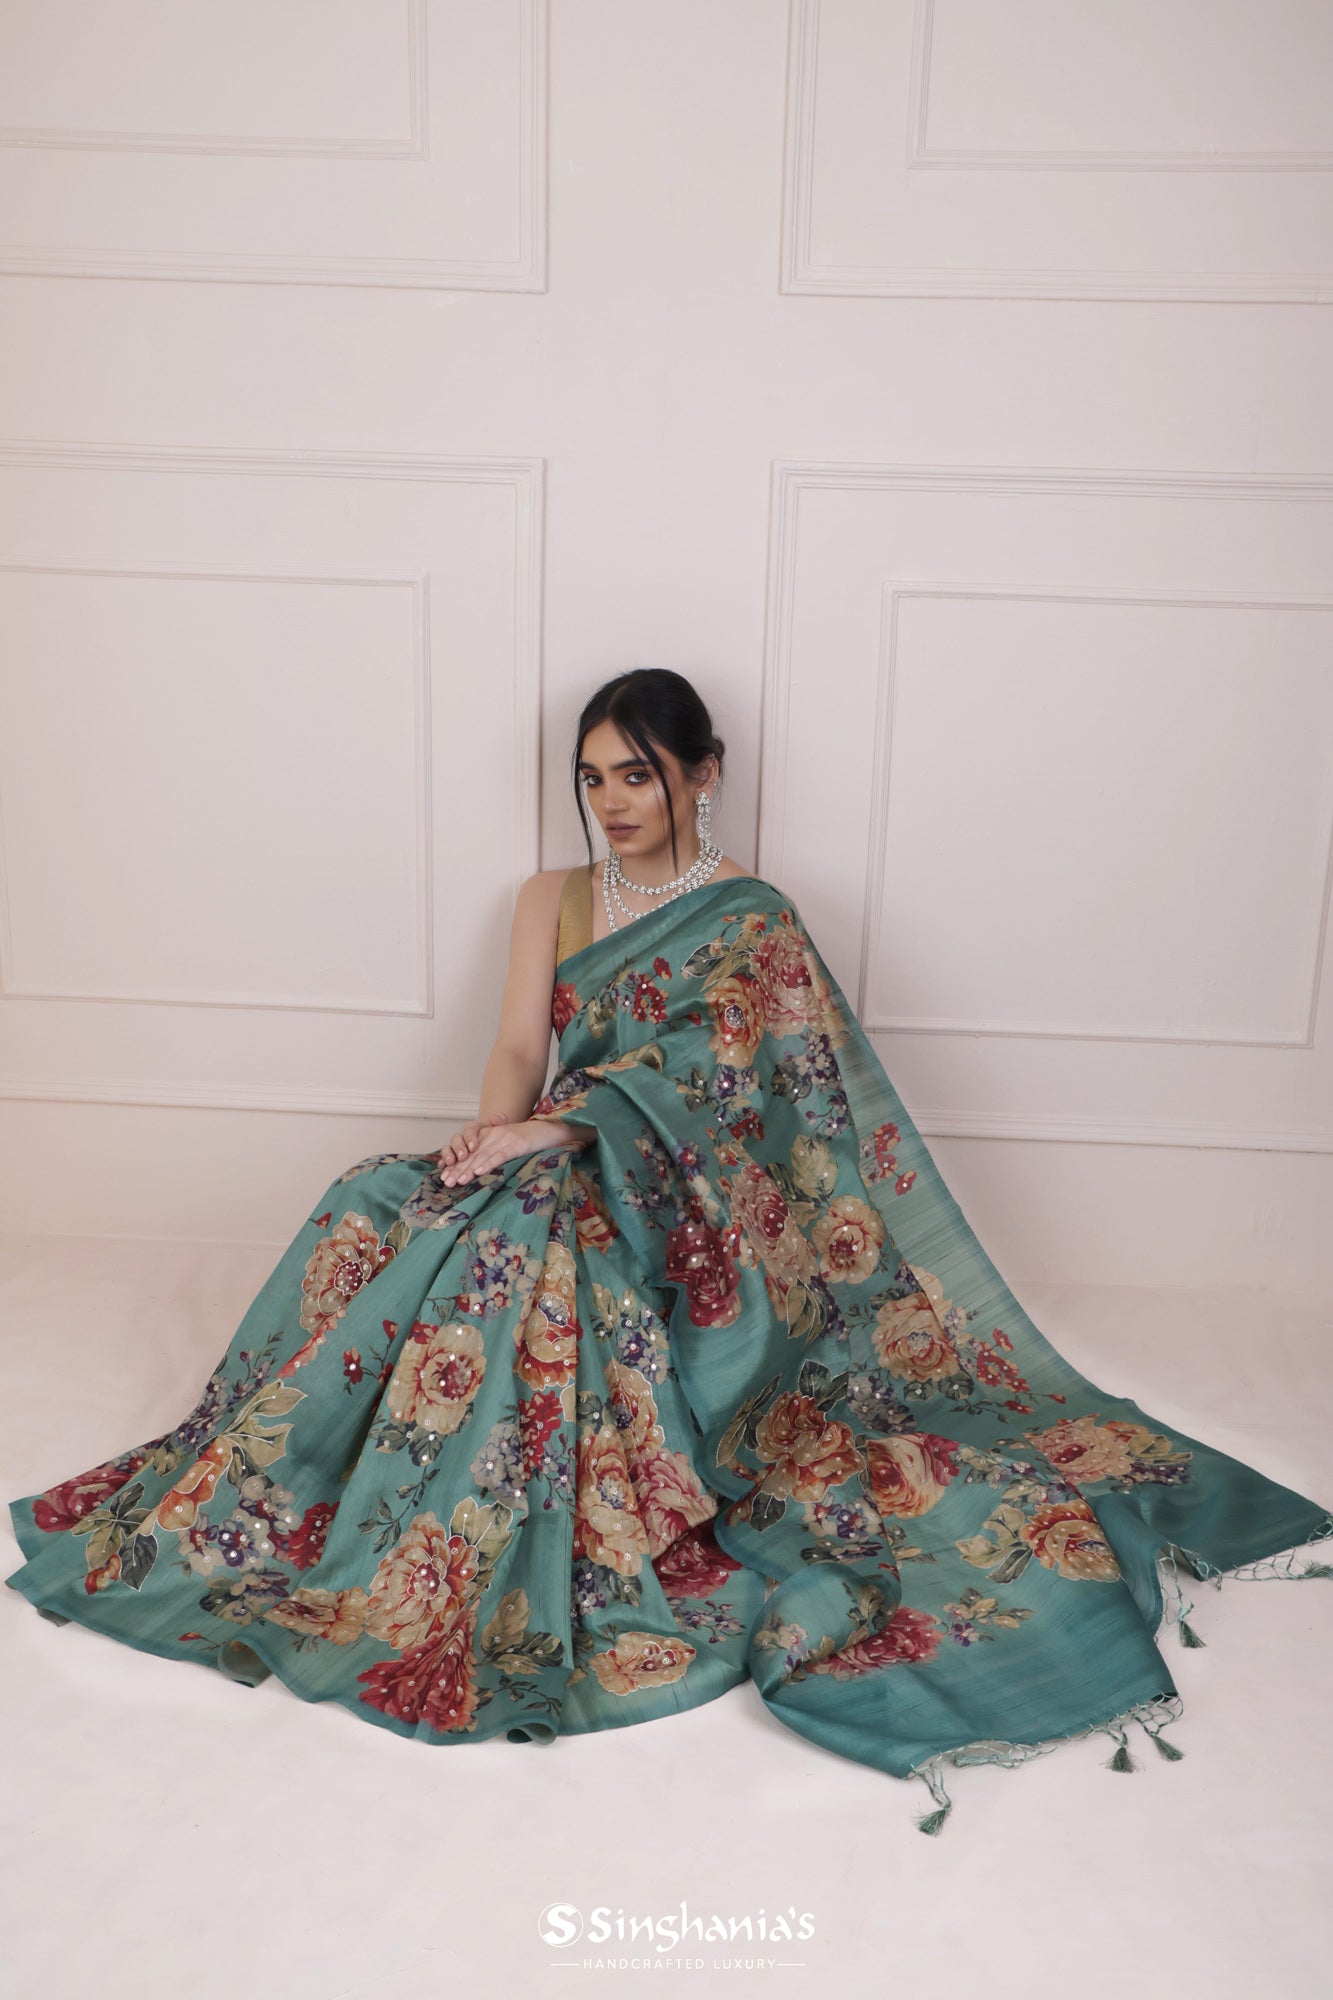 Cadet Blue Tussar Printed Saree With Hand Embroidery